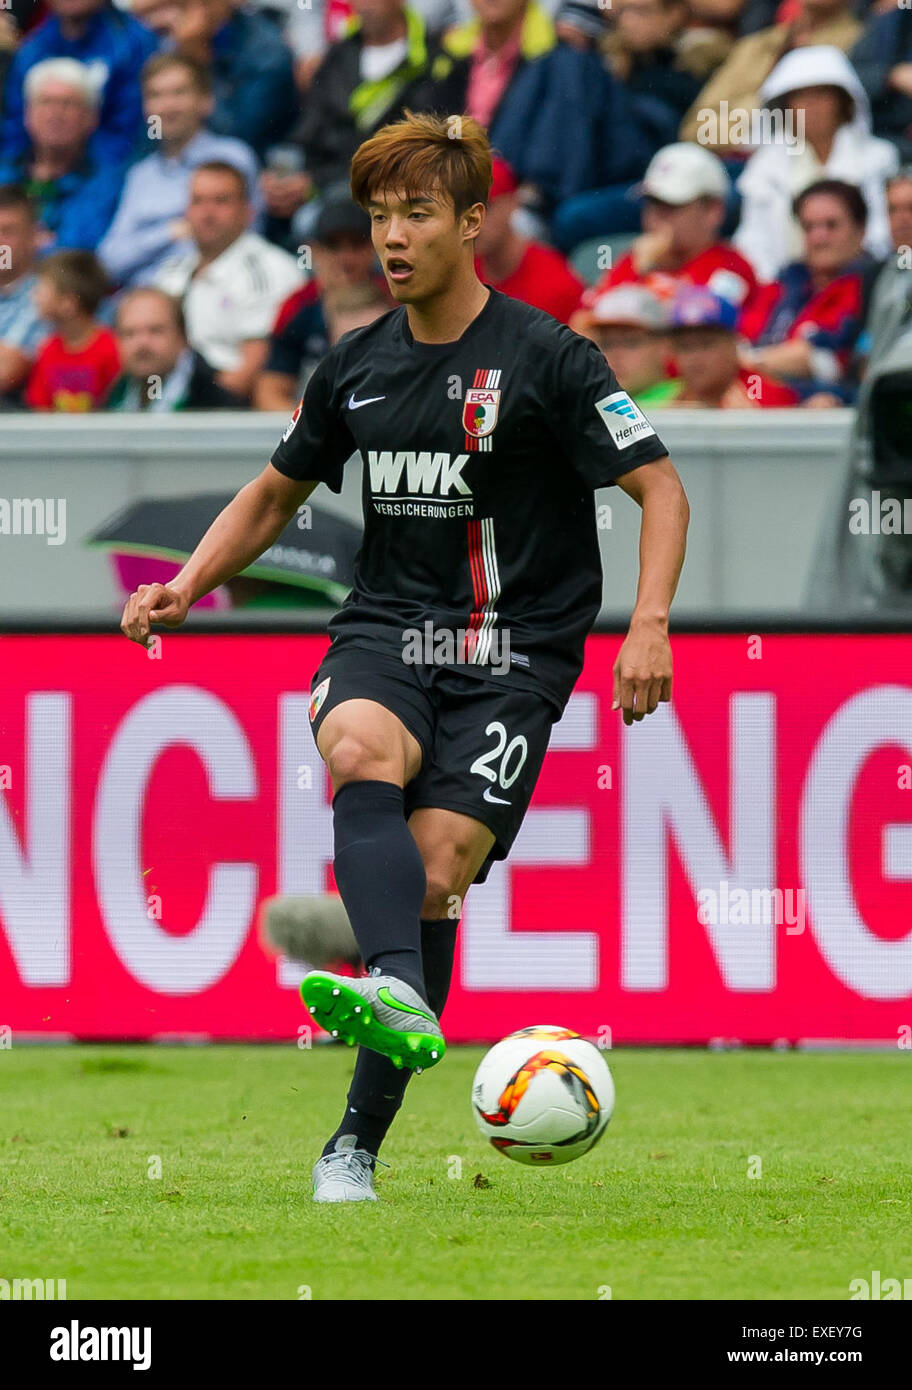 Moenchengladbach, Germany. 12th July, 2015. Augsburg's Jeong-Ho Hong in action during the Telekom Cup soccer match between FC Bayern Munich and FC Augsburg at Borussia Park in Moenchengladbach, Germany, 12 July 2015. Photo: Guido Kirchner/dpa/Alamy Live News Stock Photo